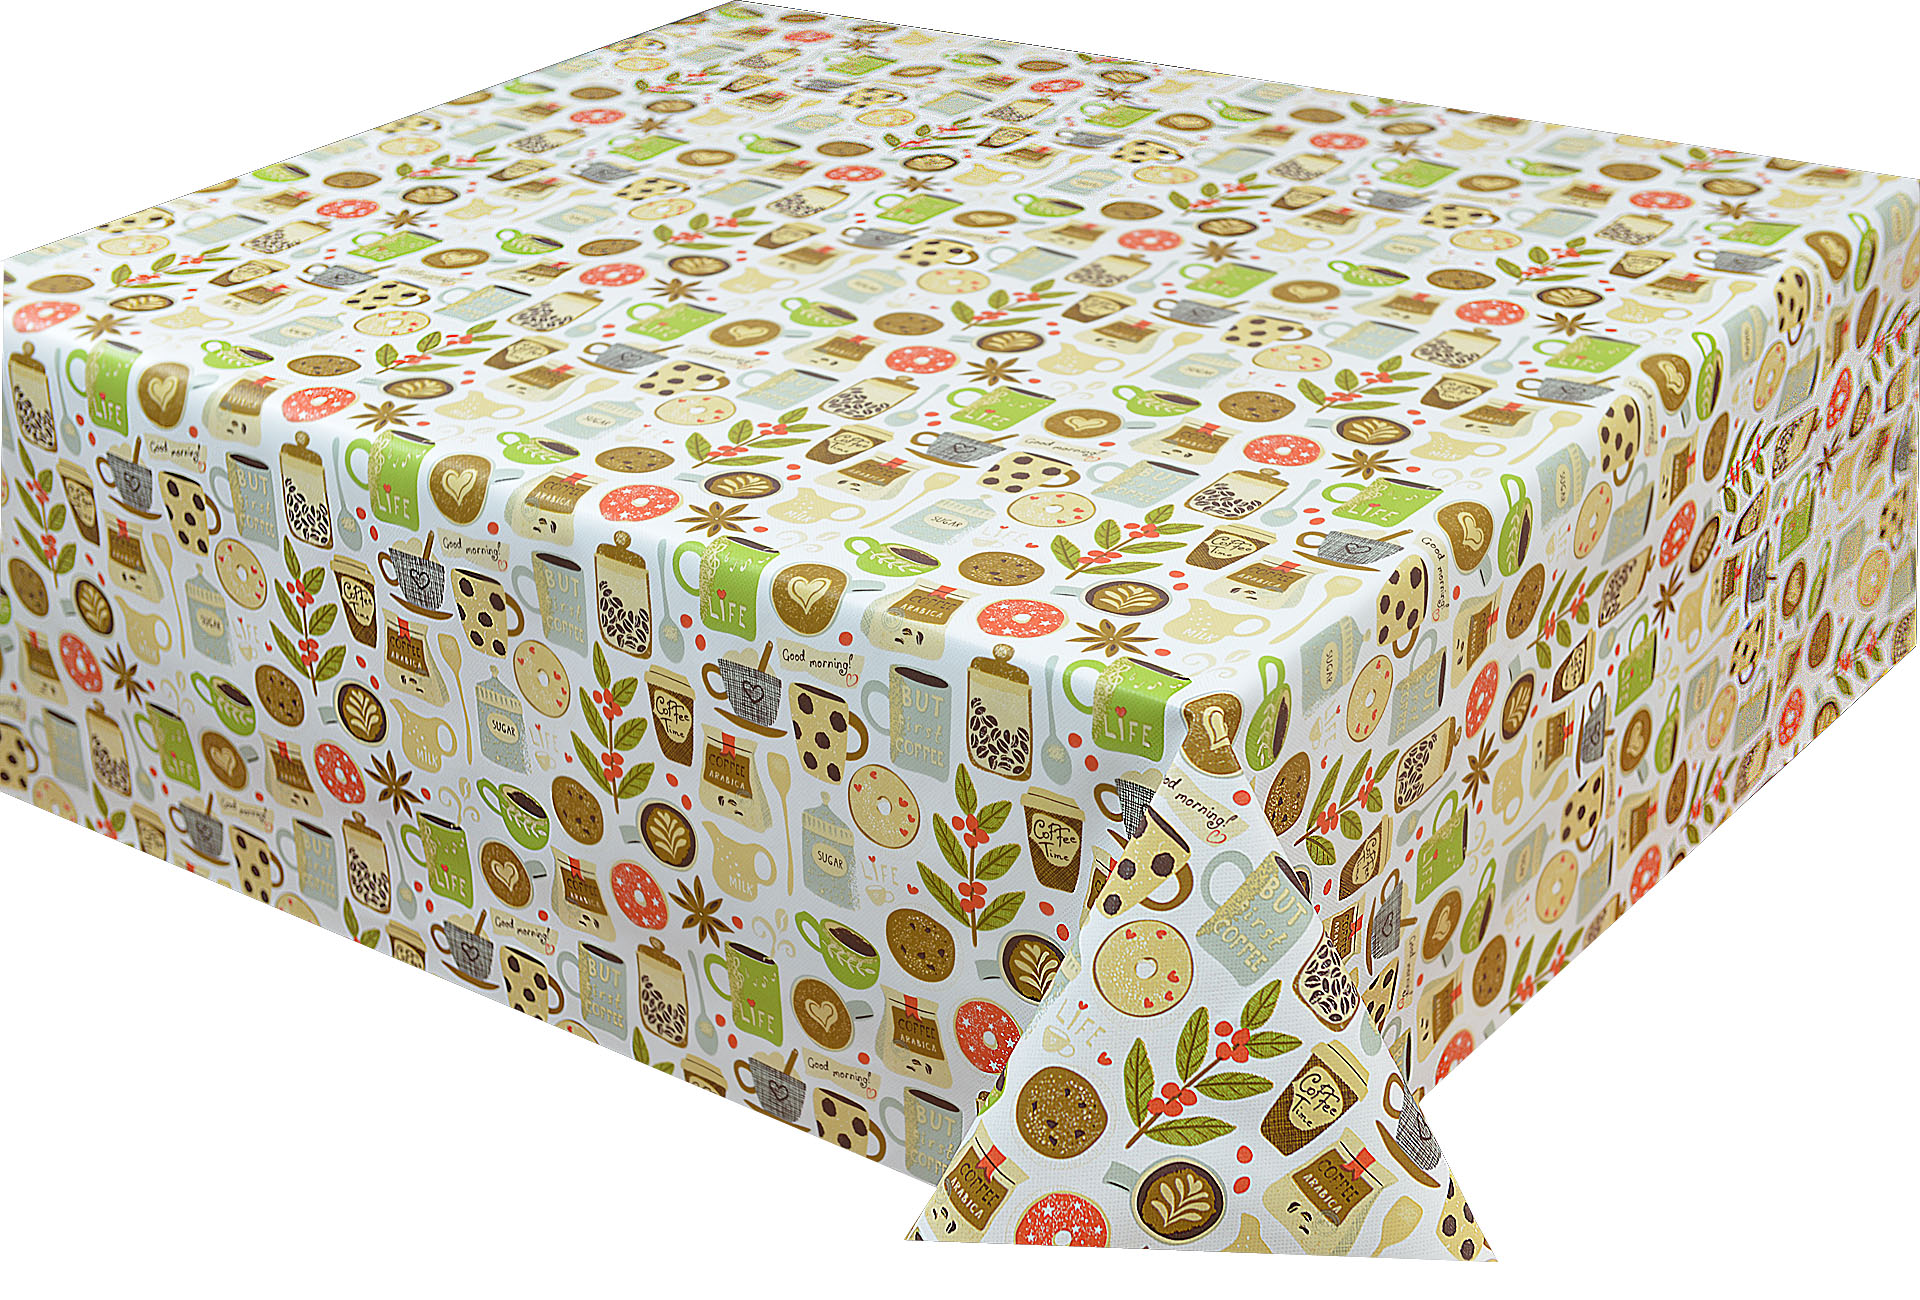 Table Cover - Printed Table Cover - Europe Design Table Cover - BS-EN8038